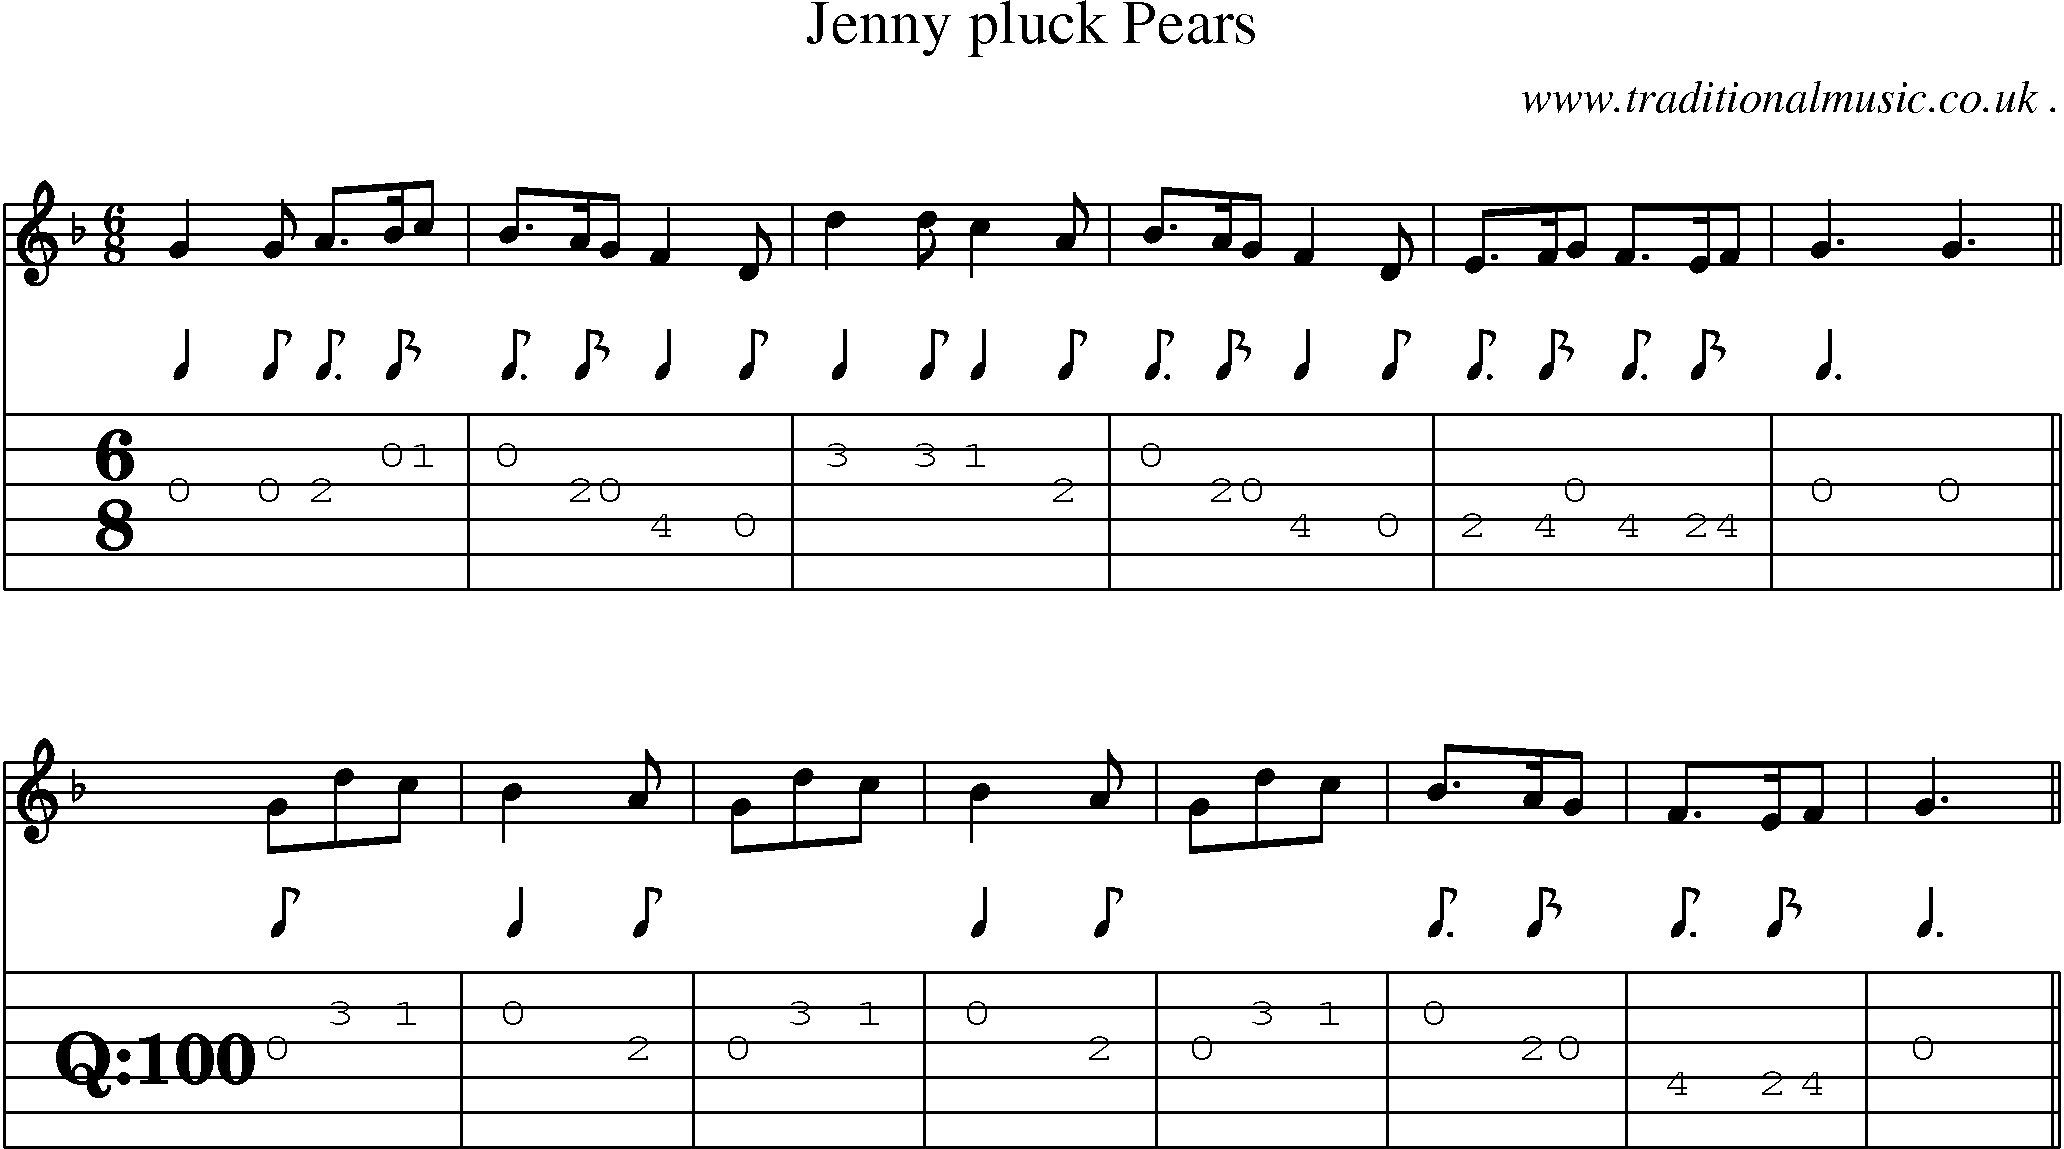 Sheet-Music and Guitar Tabs for Jenny Pluck Pears